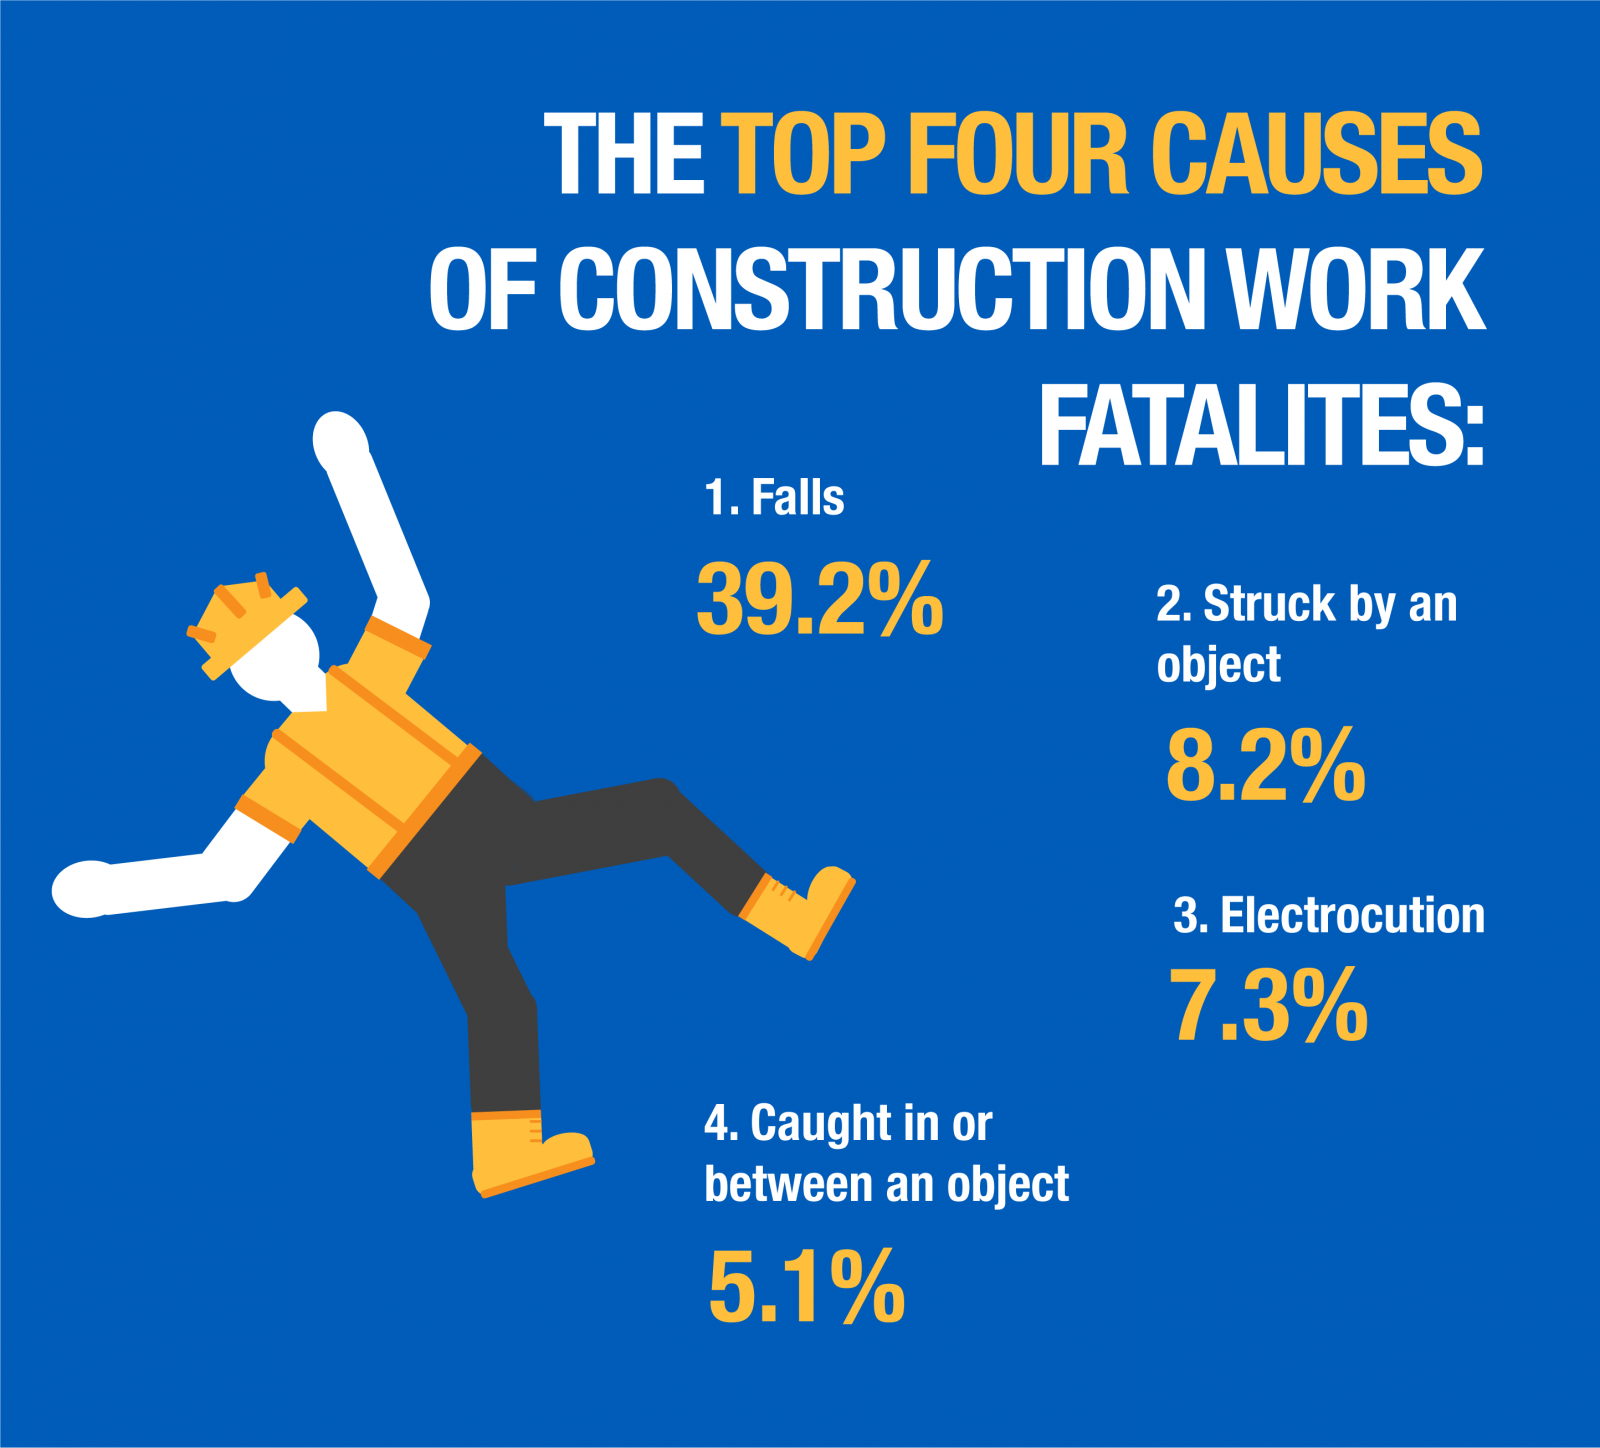 Construction injuries, deaths due to shortcuts and underquoting